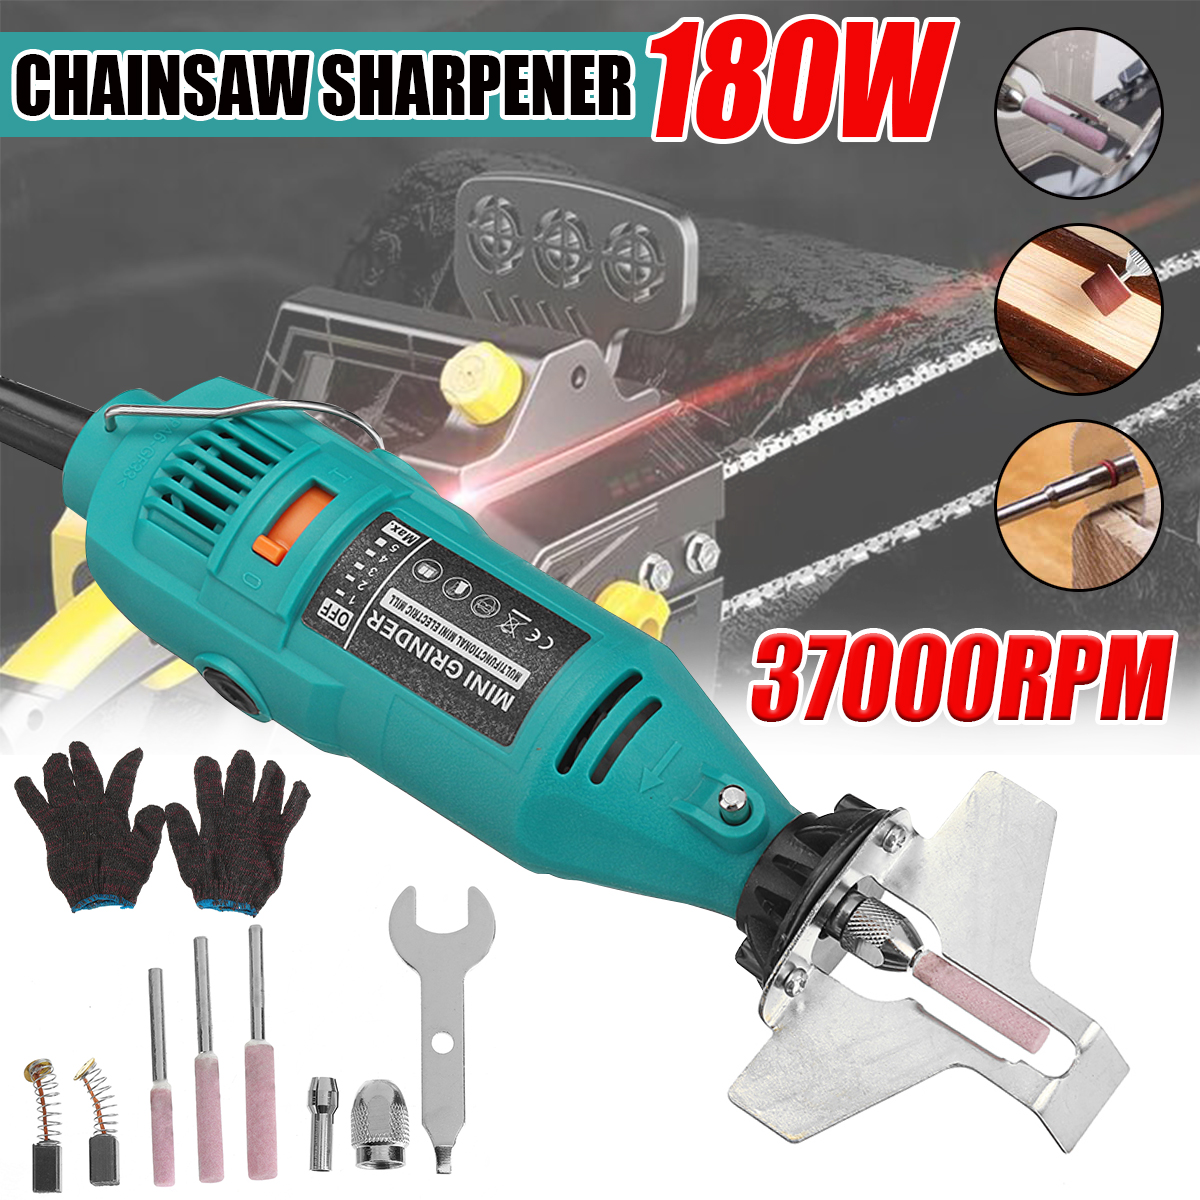 180W-5-Speed-37000rpm-Electric-Chainsaw-Sharpener-Grinder-Chain-Saw-File-Pro-Tool-Set-1885451-2